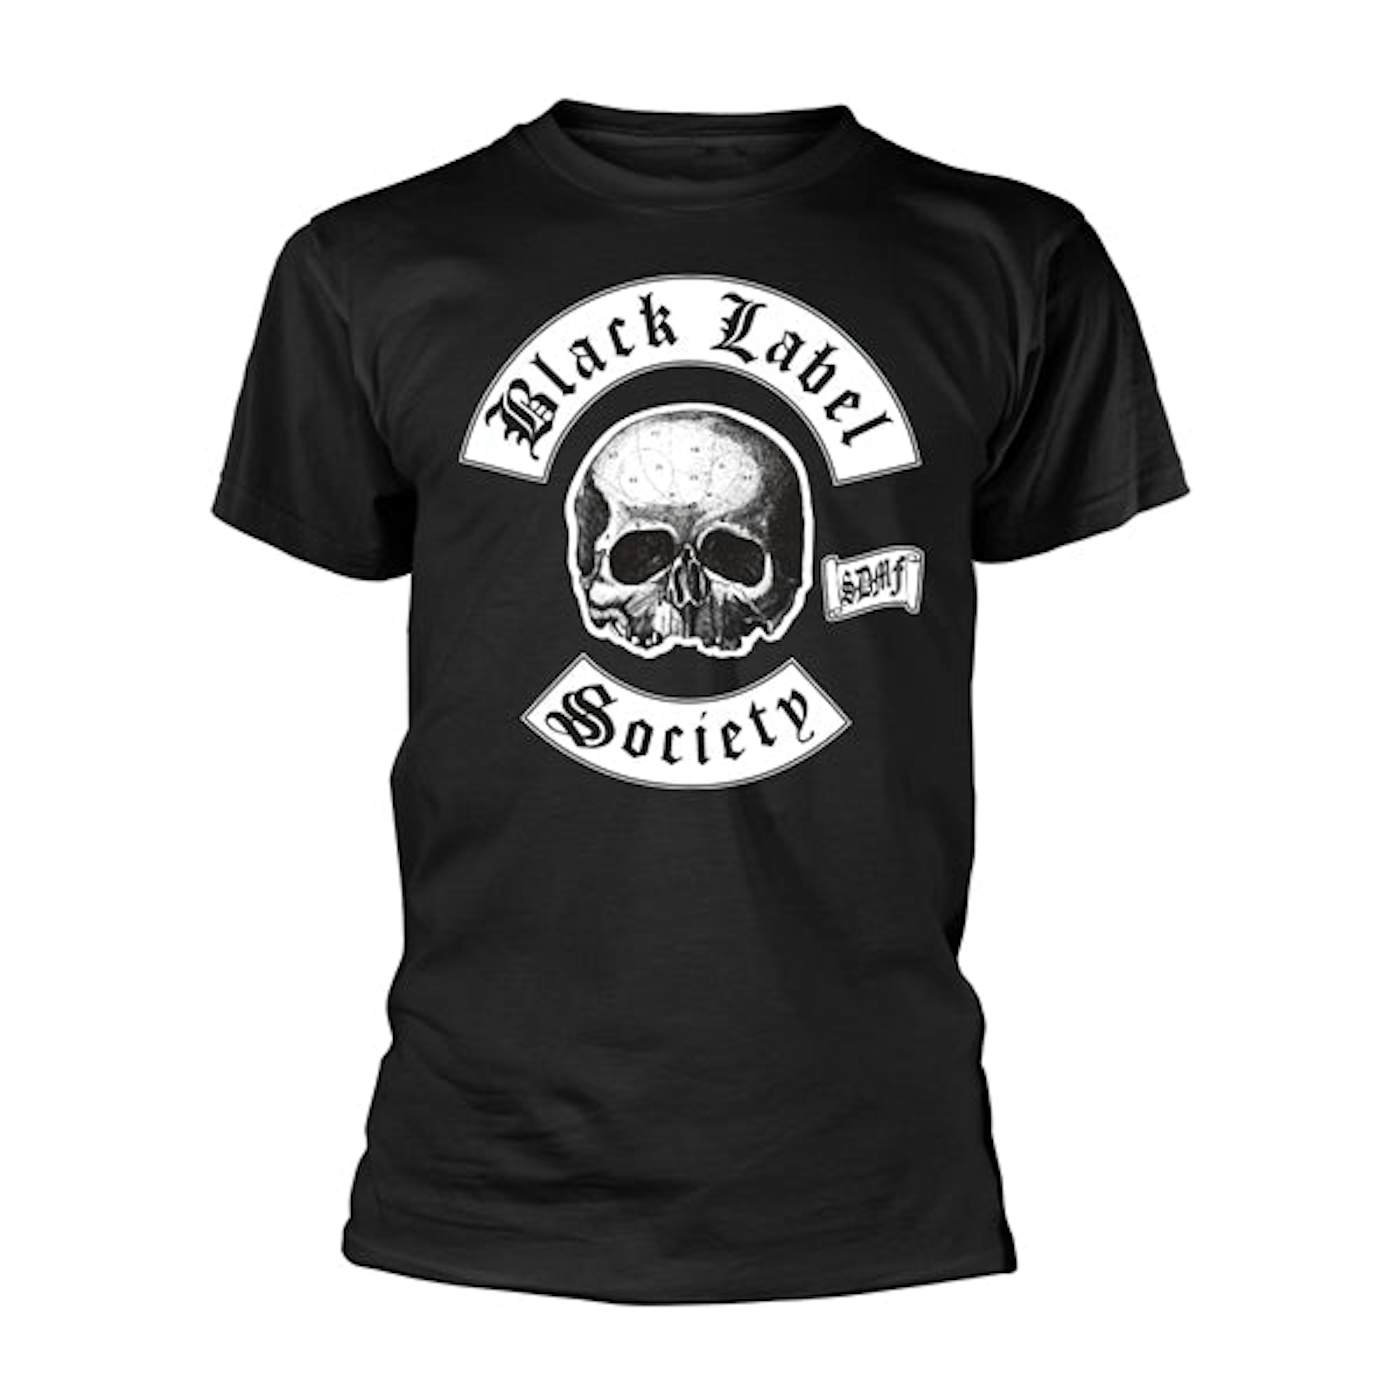 Black Label Society T-Shirt - The Almighty (Black)